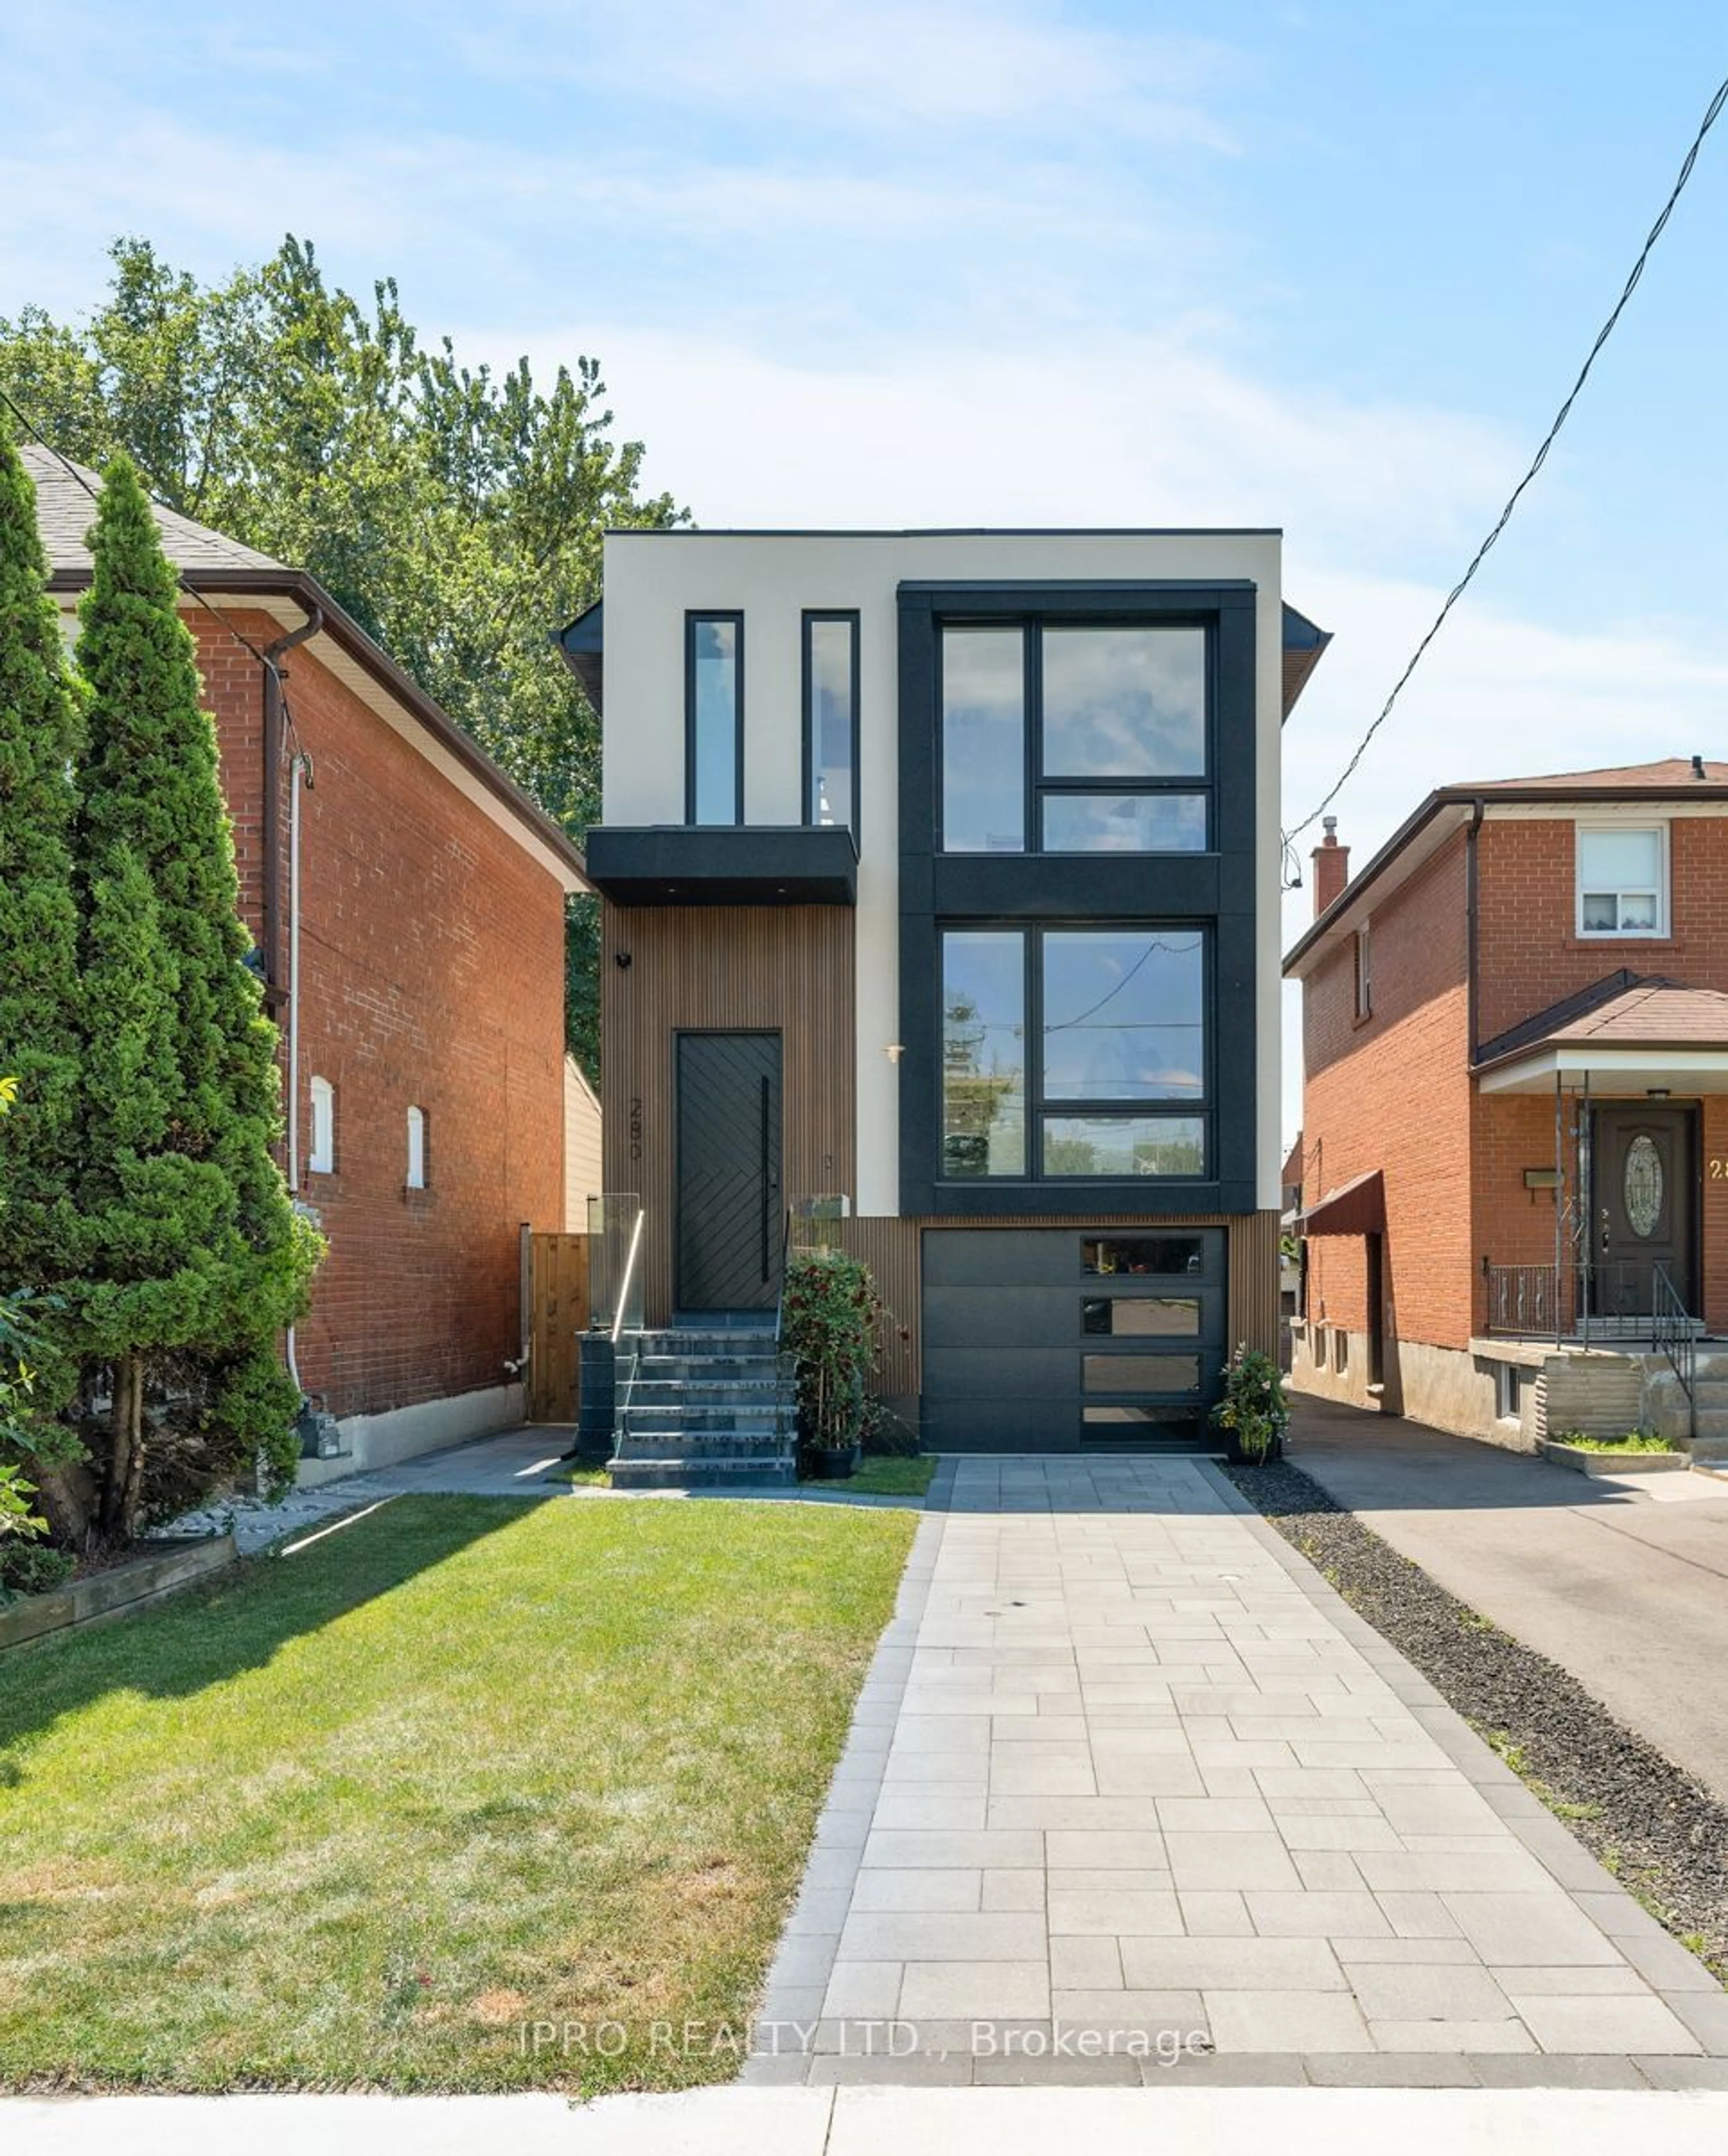 Home with brick exterior material for 280 Westlake Ave, Toronto Ontario M4C 4T6